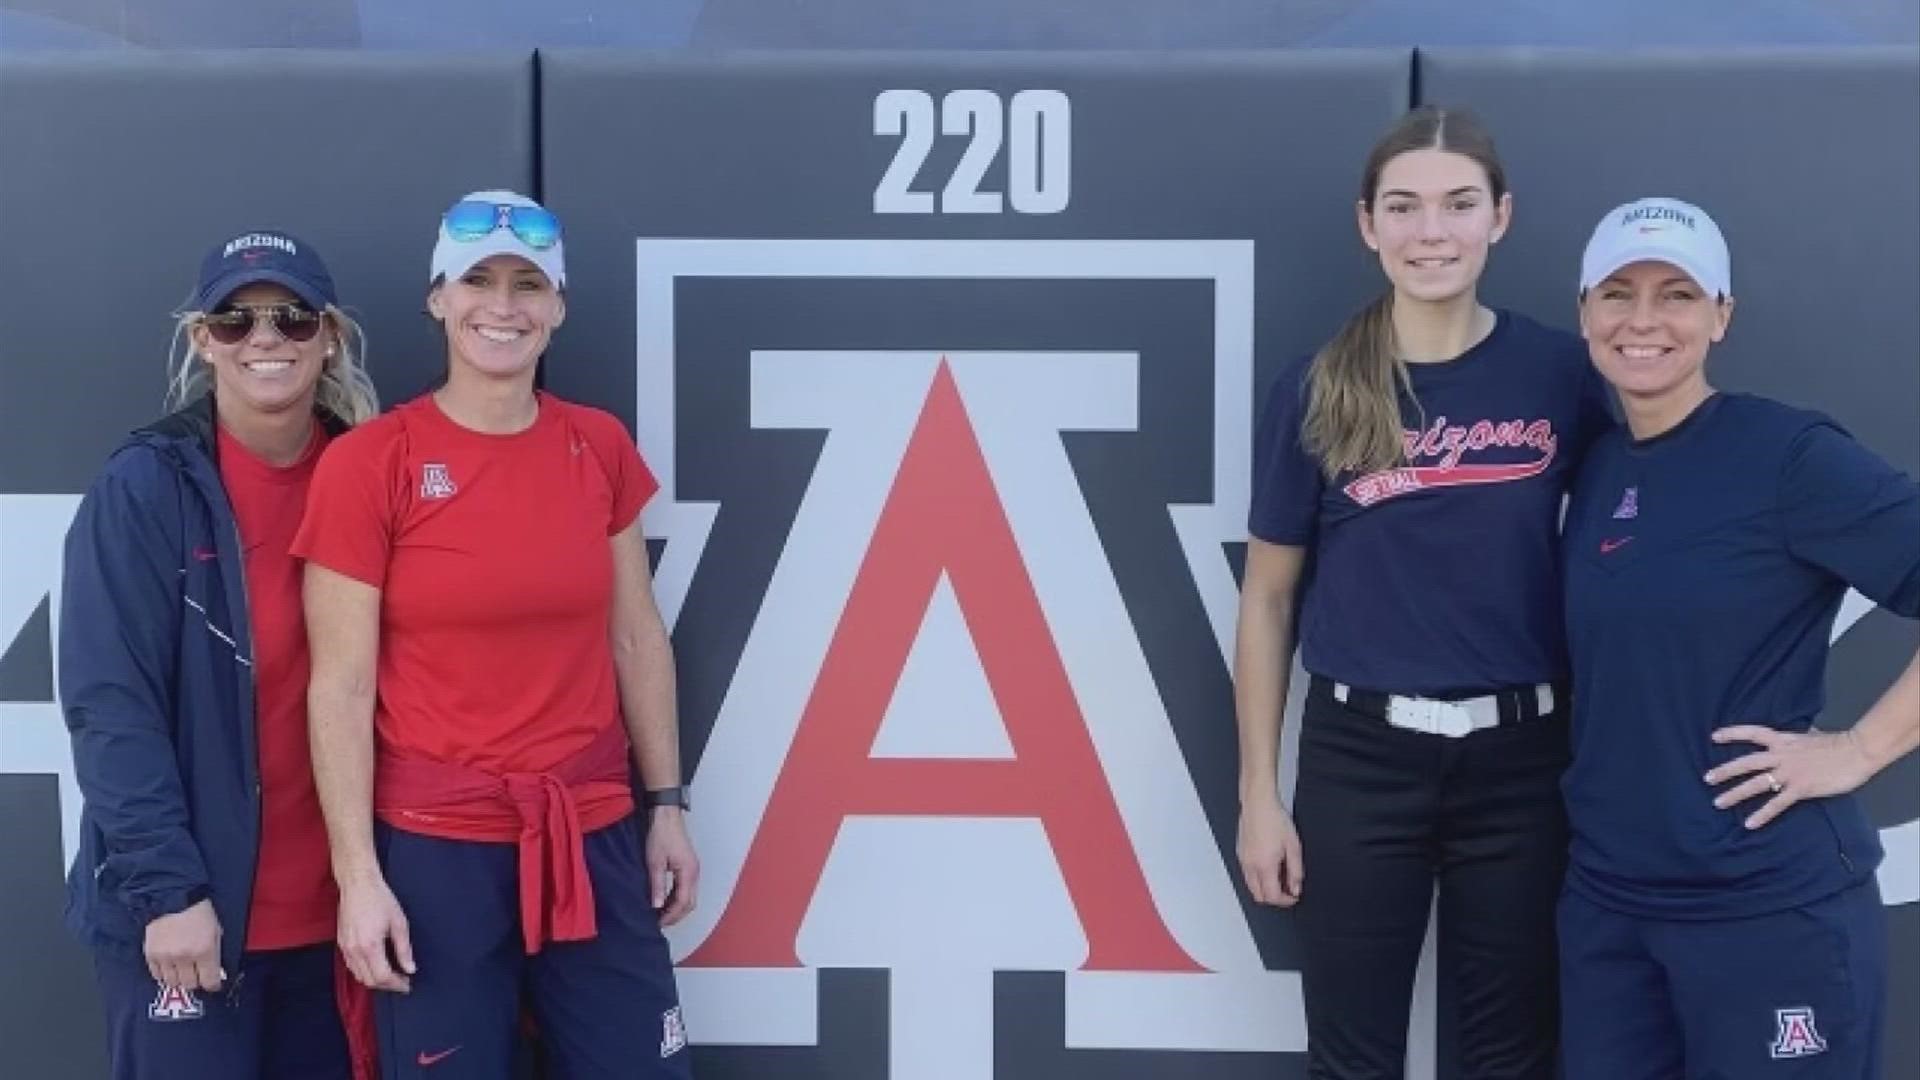 Brooke Mannon has committed to playing softball at the University of Arizona.